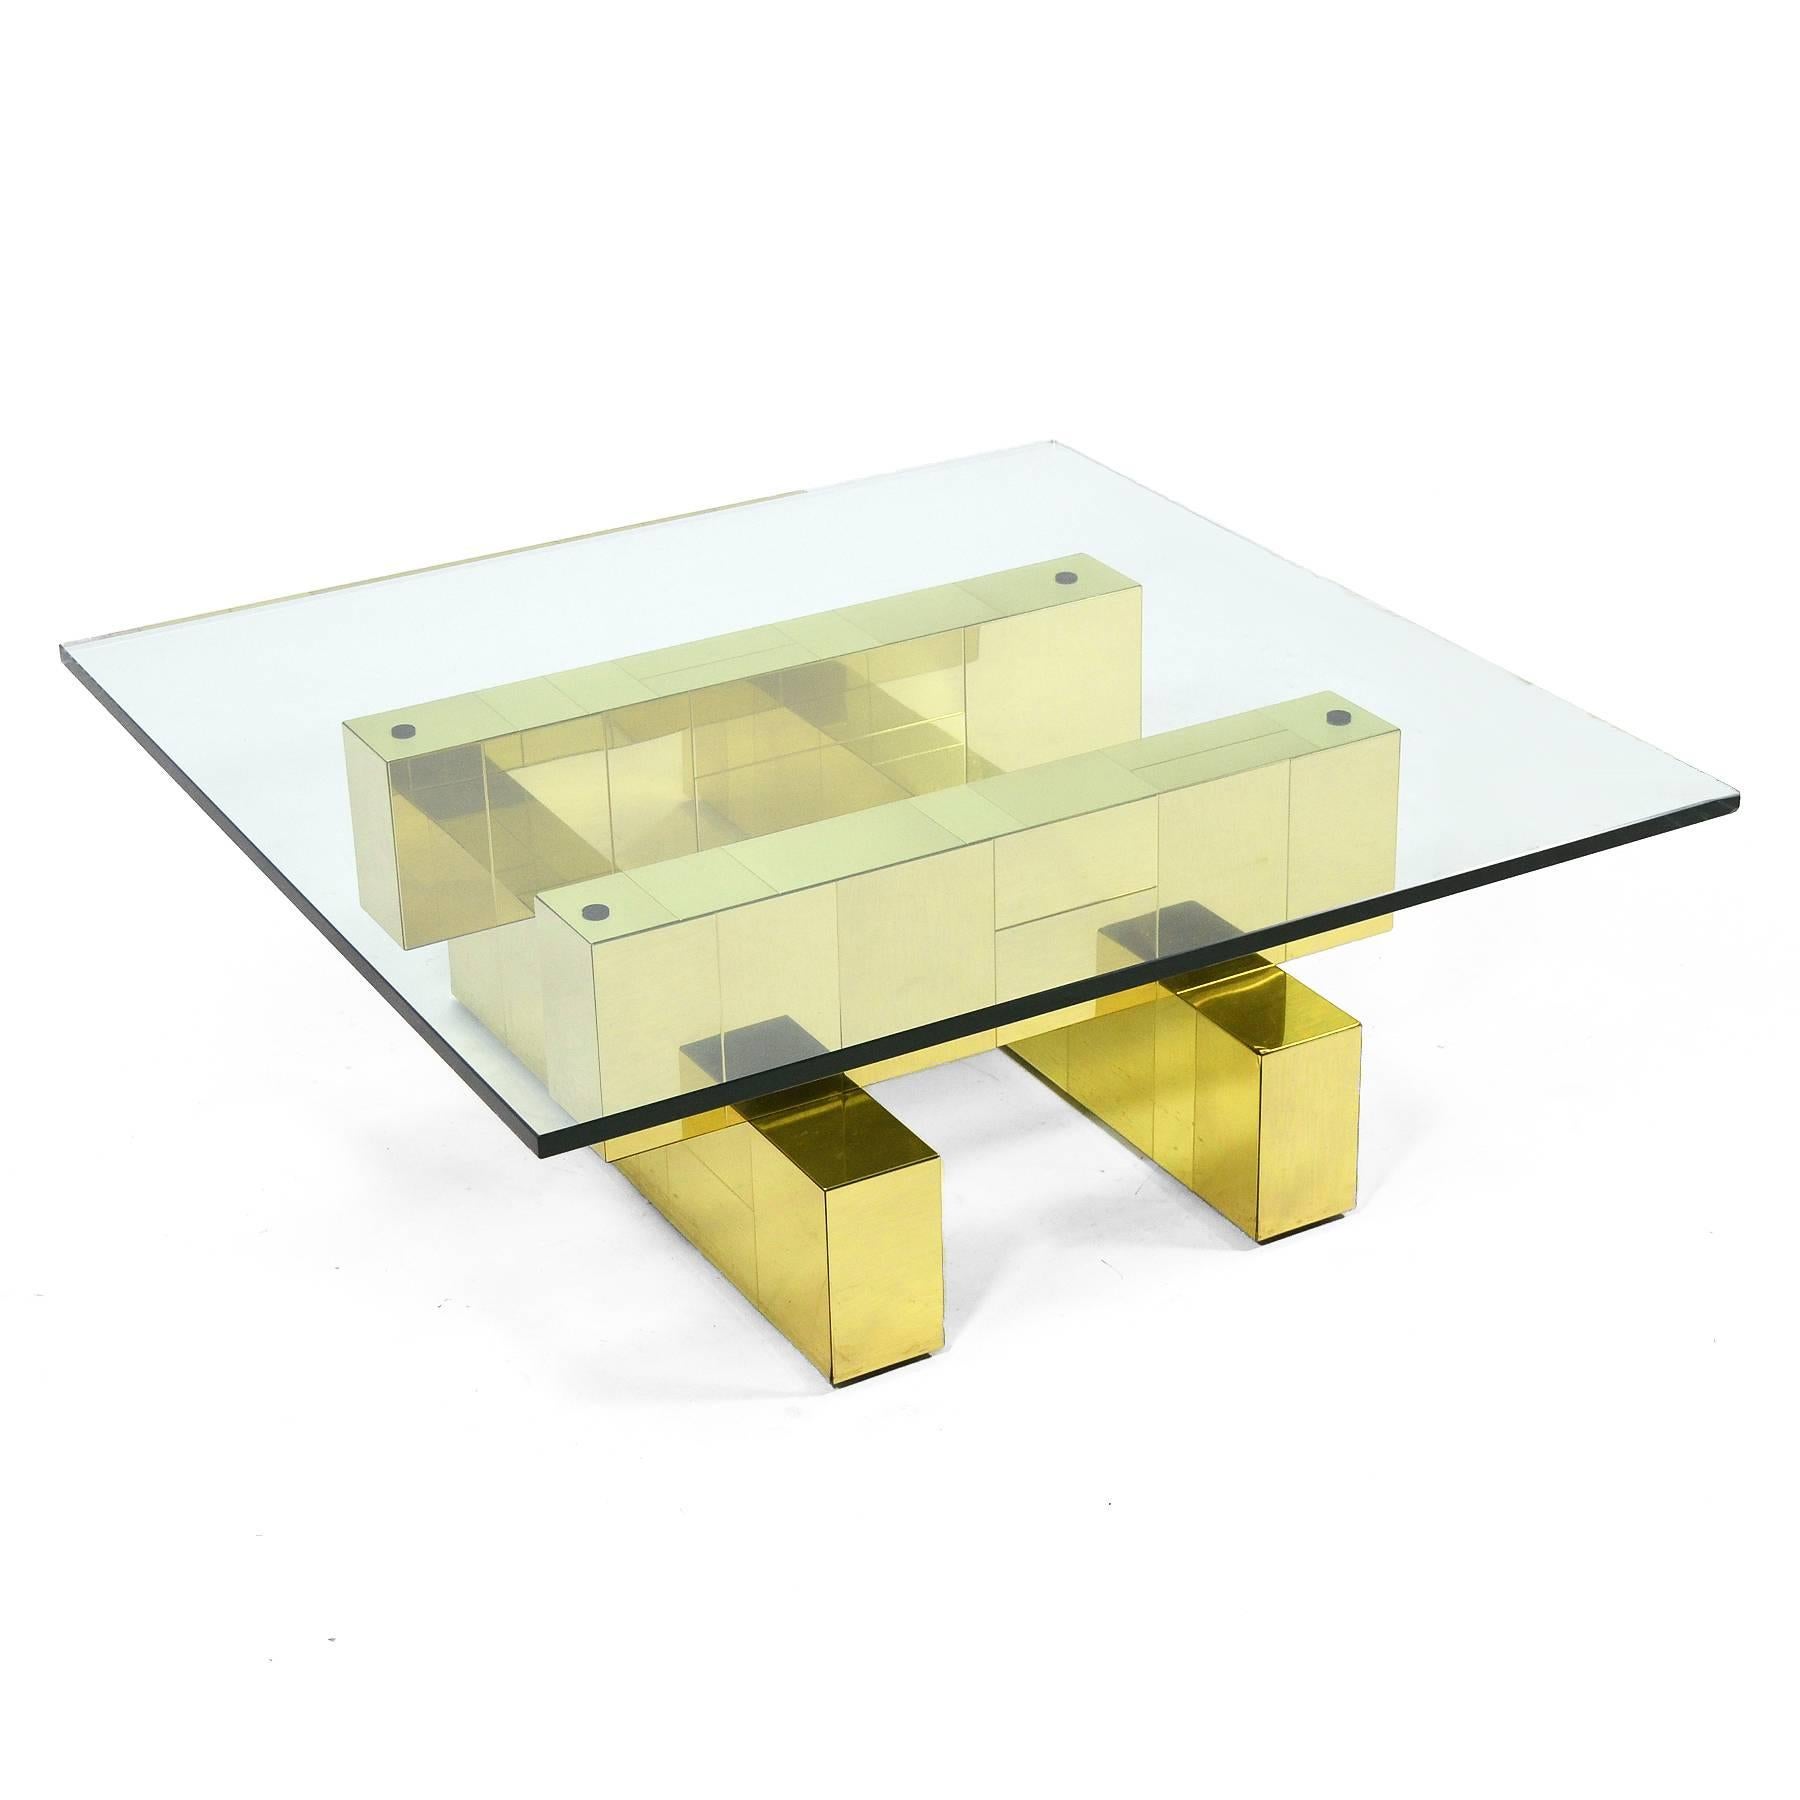 This table from Evans' PE200 series features a strong architectural quality and is clad in a brass patchwork. 

The table is signed with the signature plate (“An original Paul Evans”) on the underside of one of the top beams.